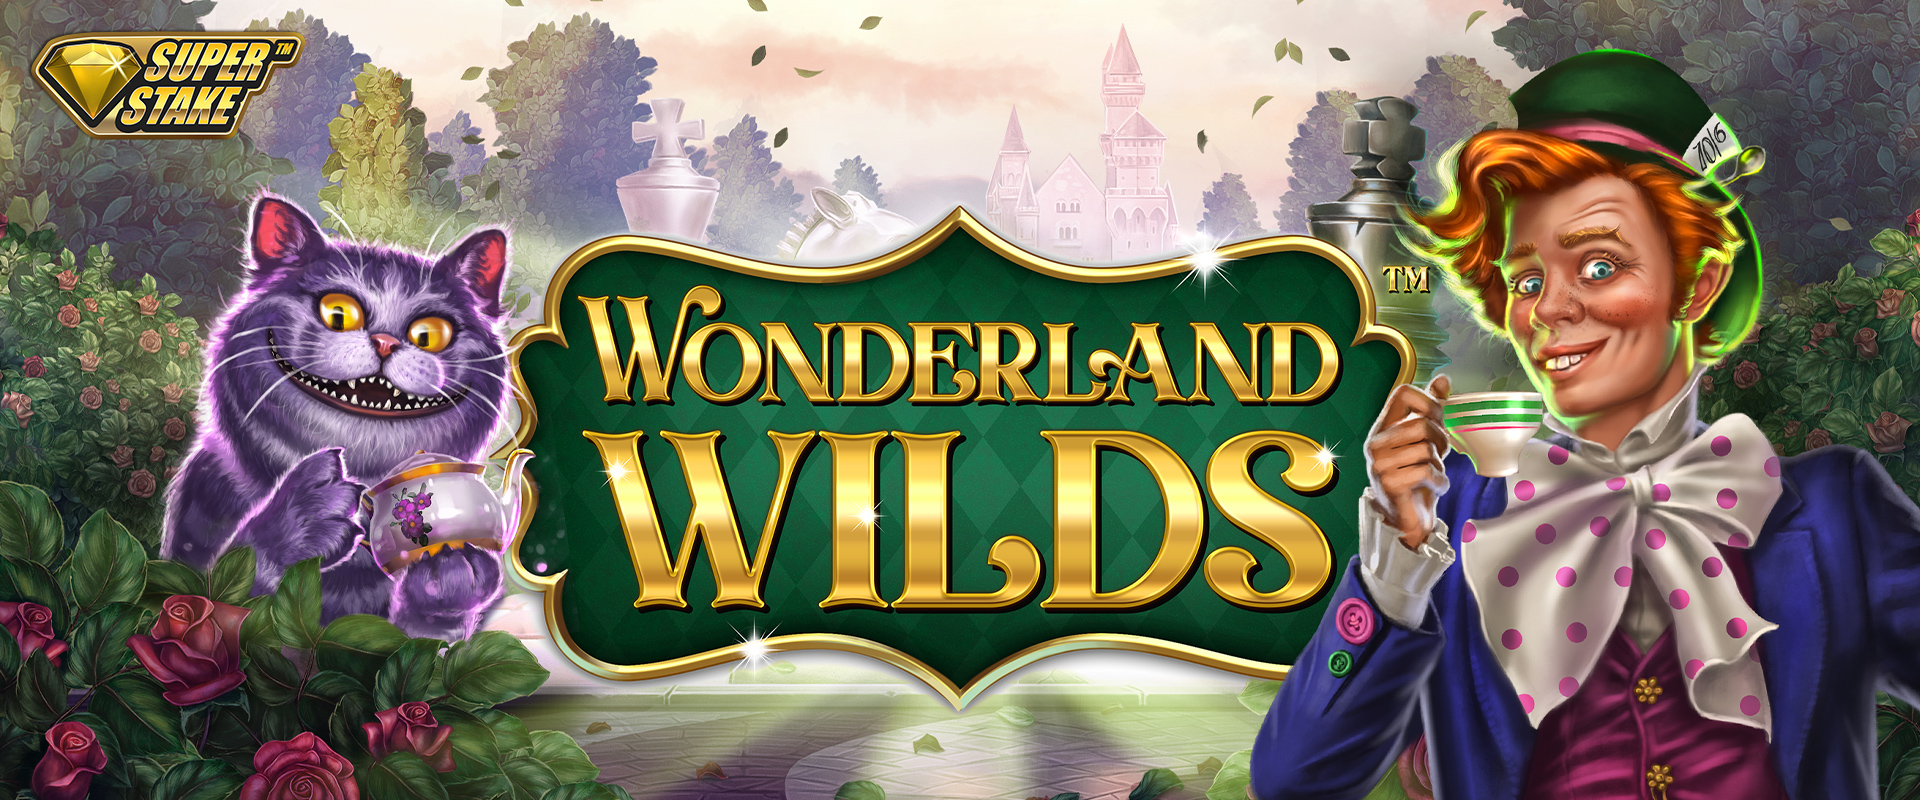 Wonderland Wilds is the new real money slot from Stakelogic